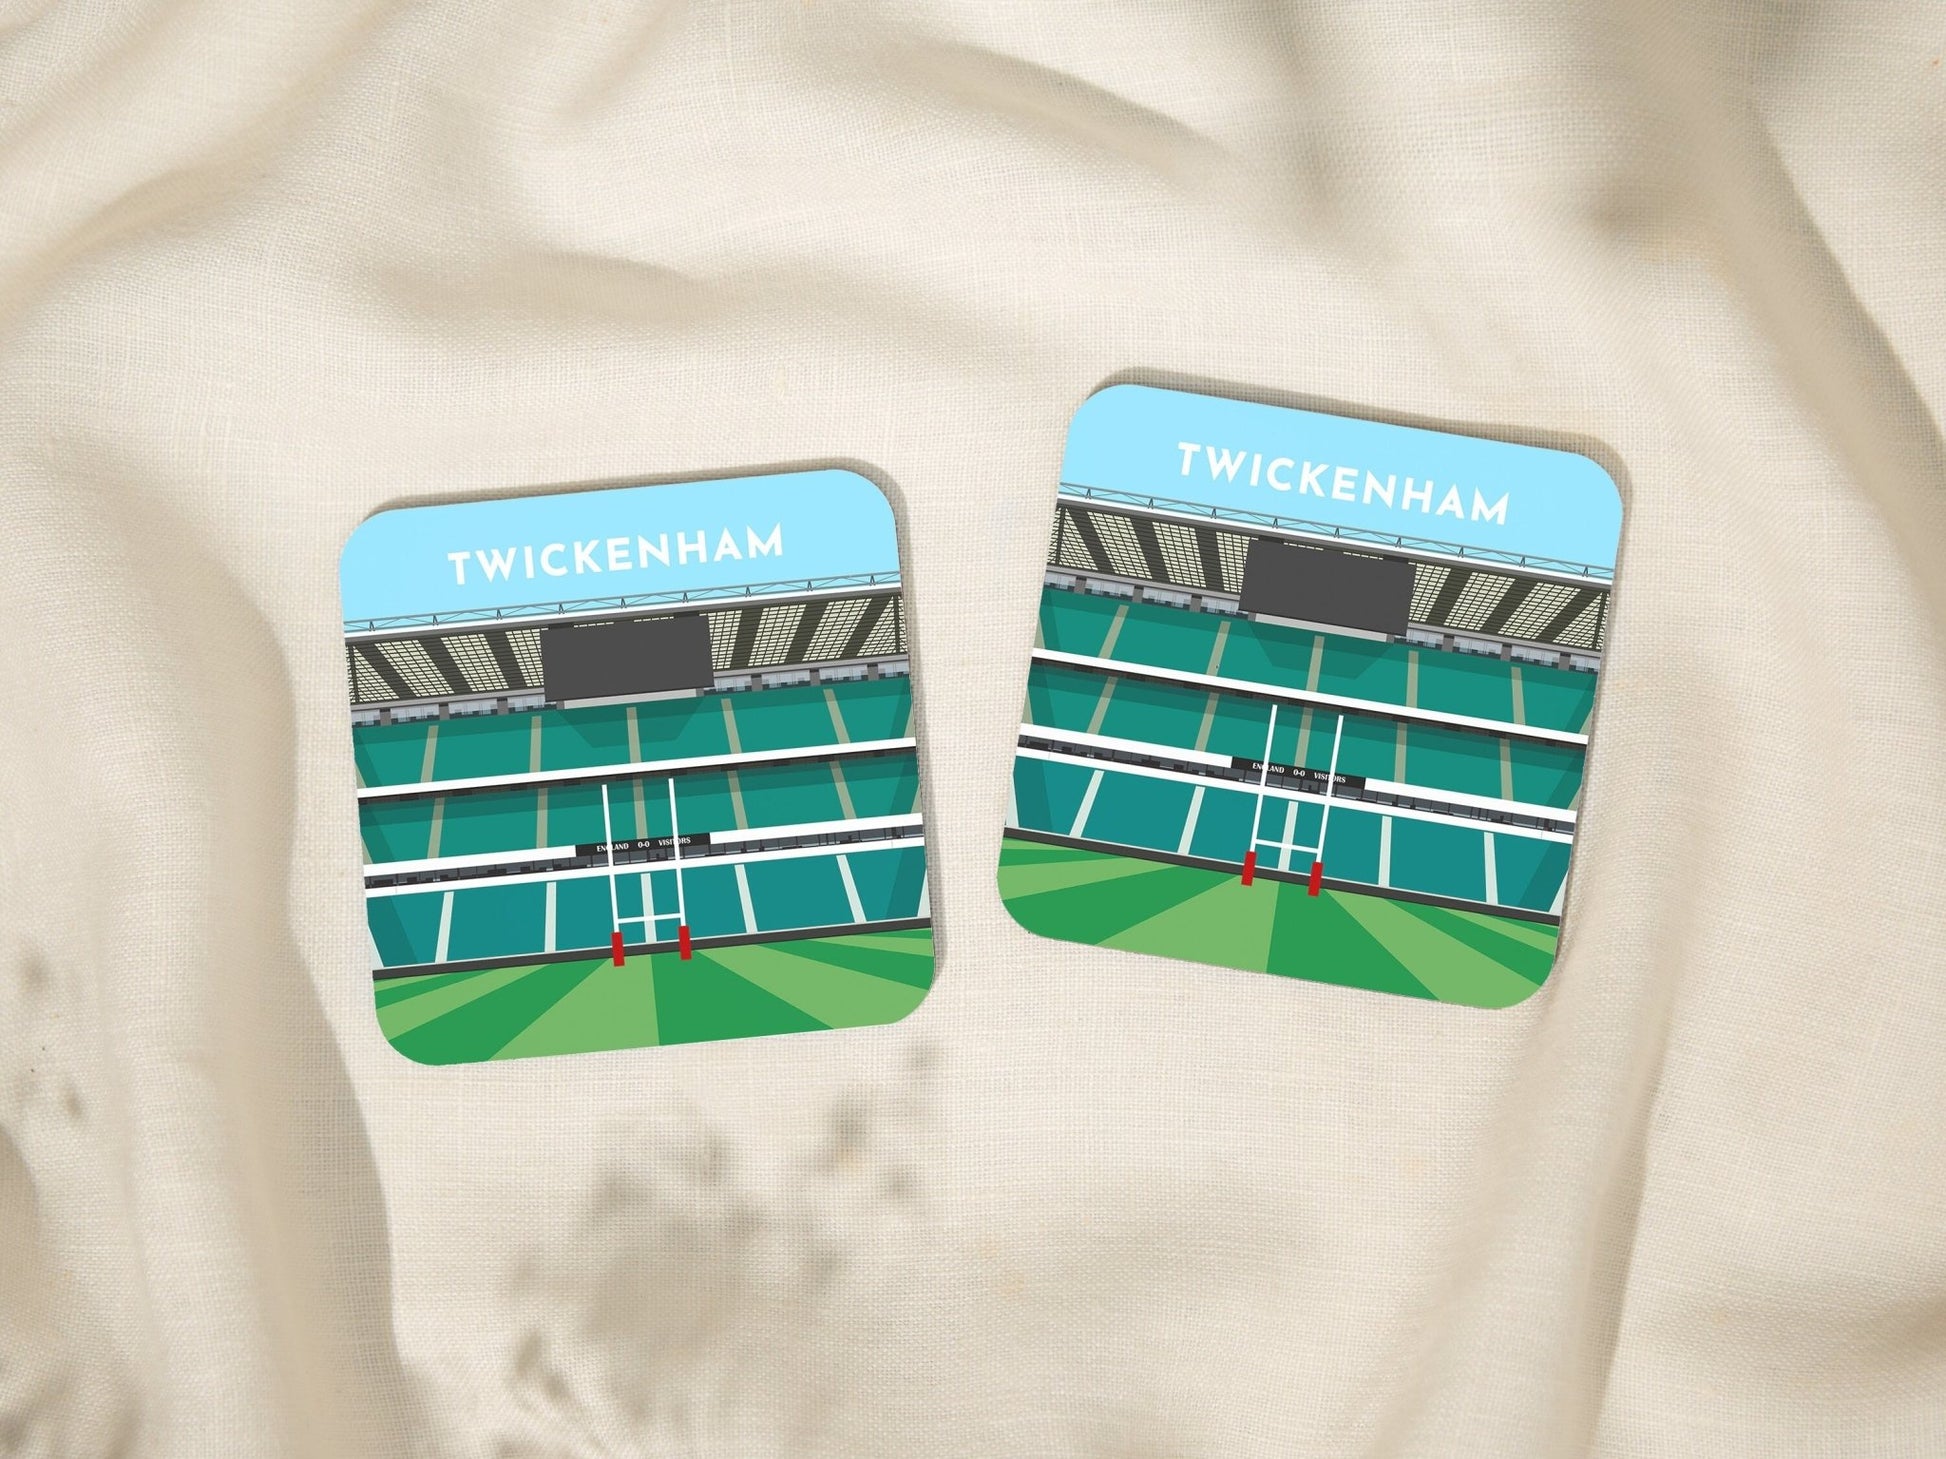 England Coaster Gift - Twickenham Stadium Rugby Art Print Drinks Mat - Rugby Gifts for Him Her - Stocking Filler Gifts - Turf Football Art